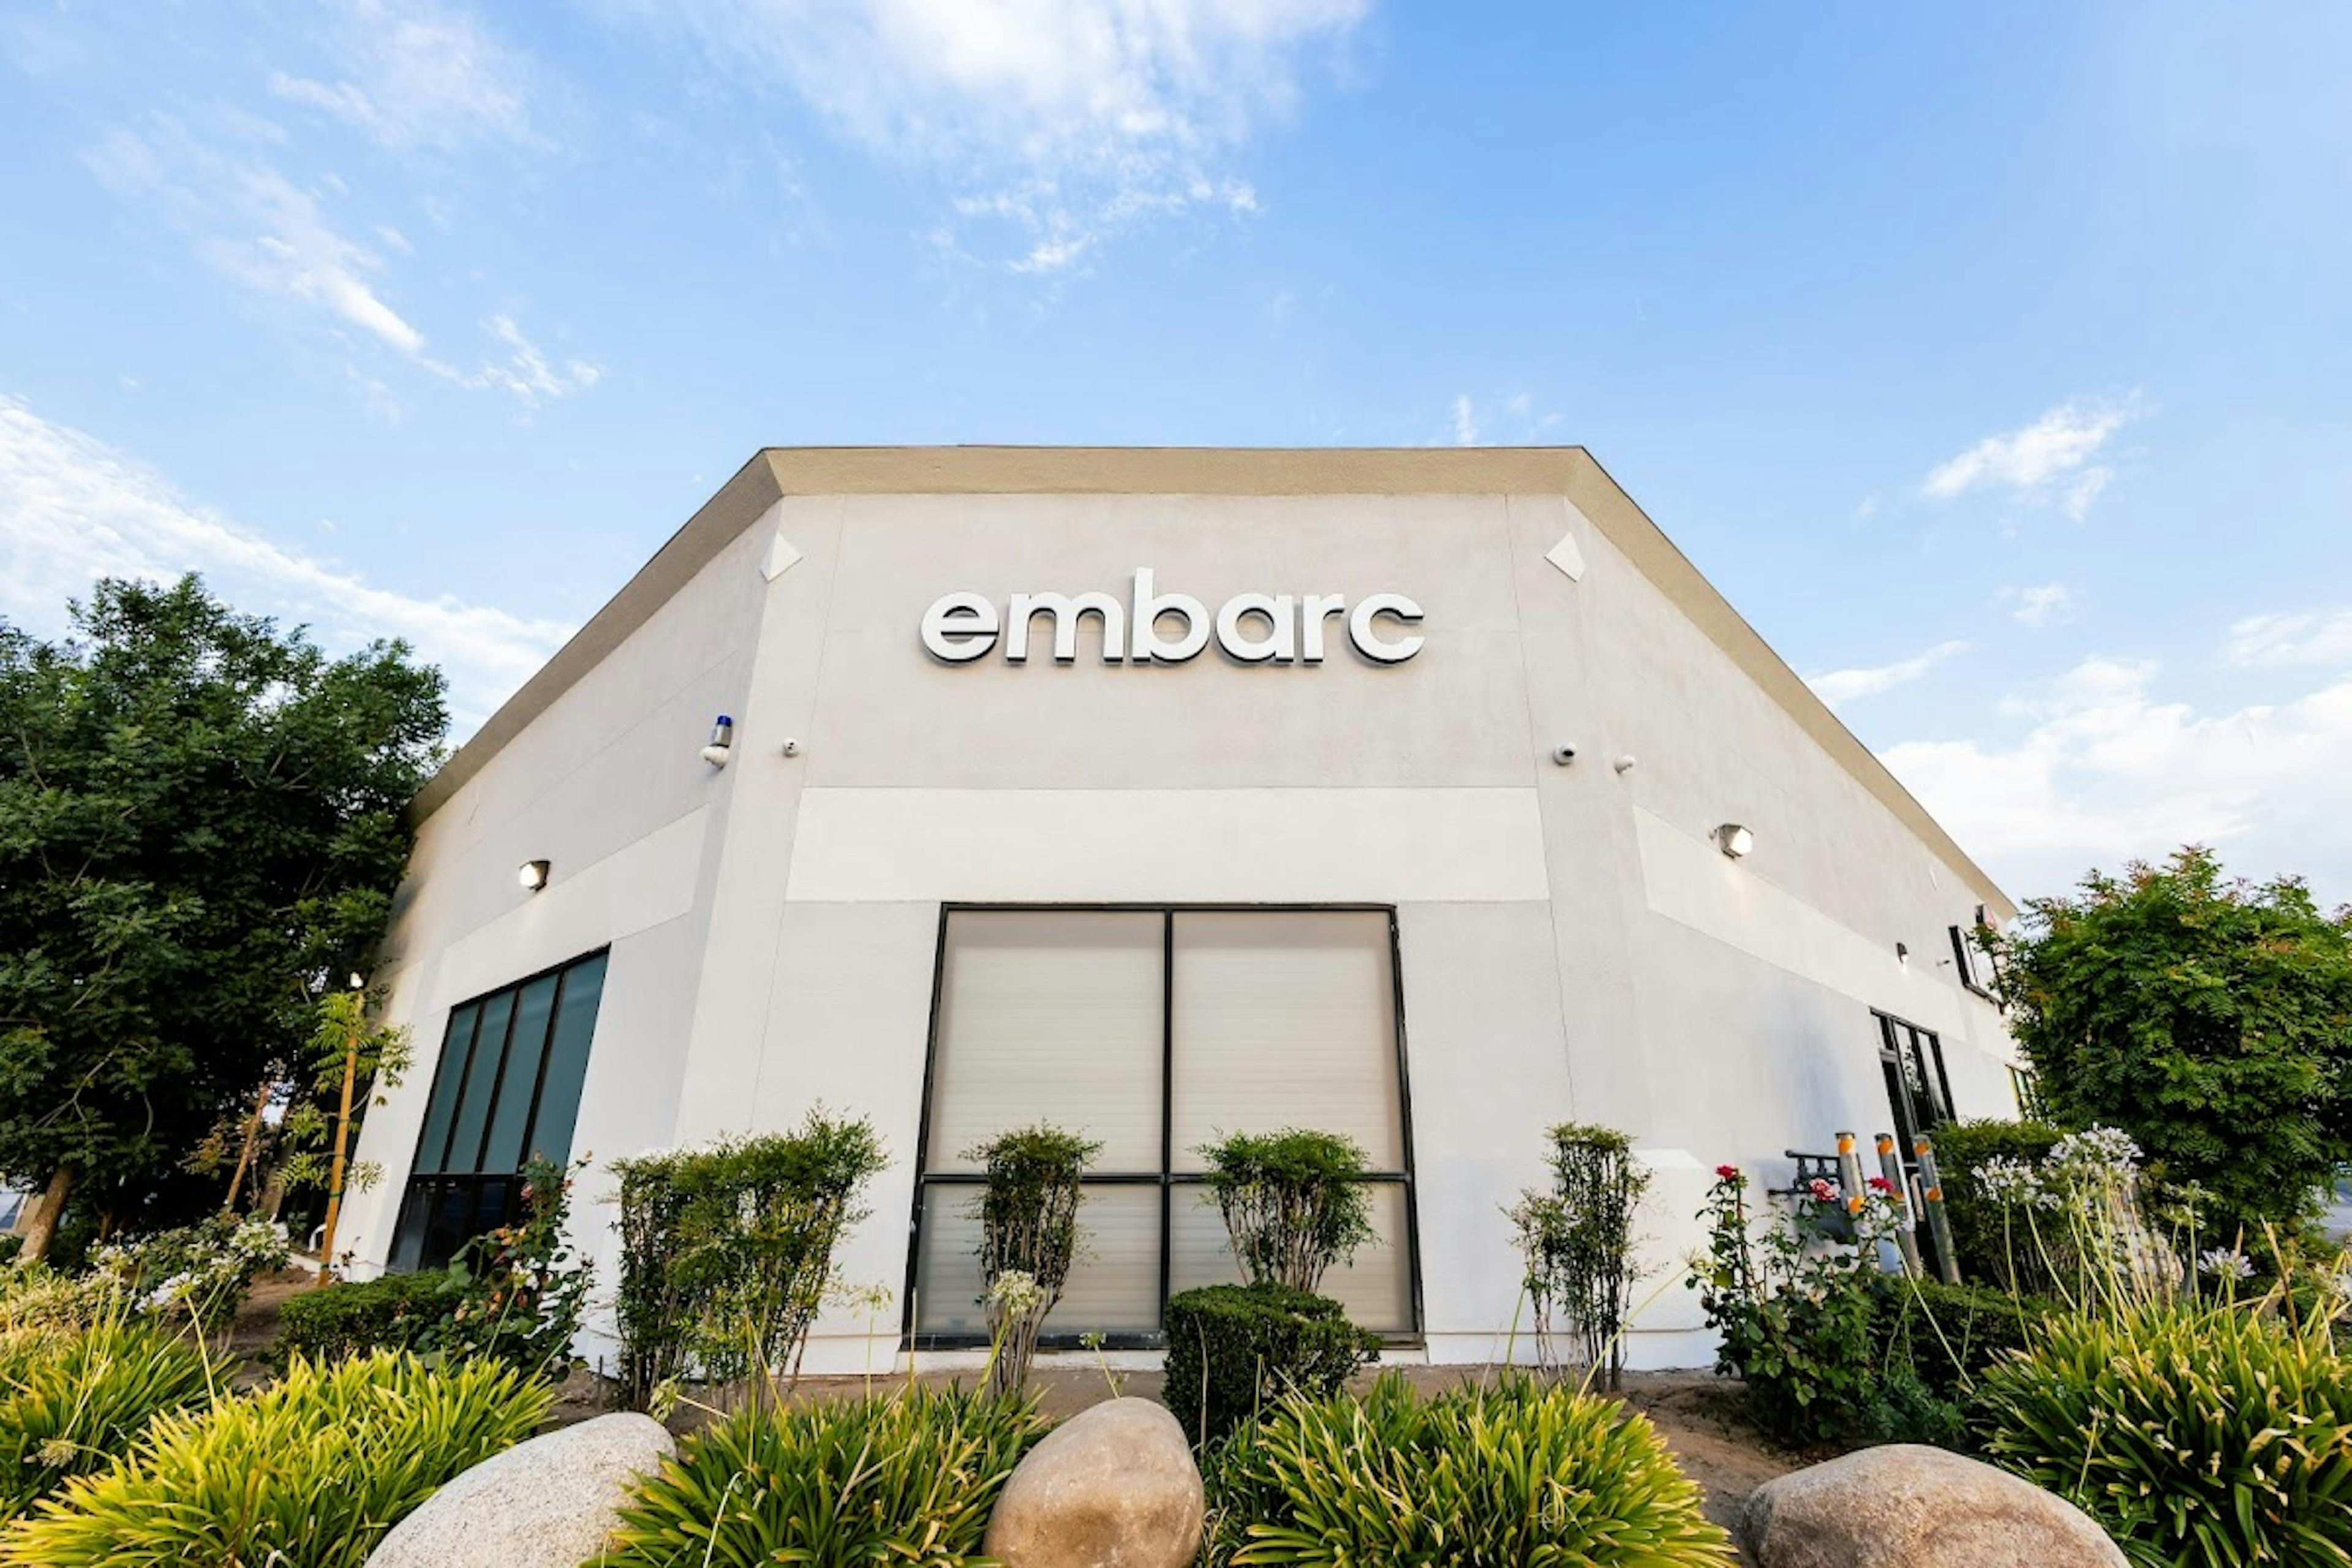 Embarc cannabis dispensary storefront in Fresno, California, illuminated by bright sunlight with a clear blue sky backdrop